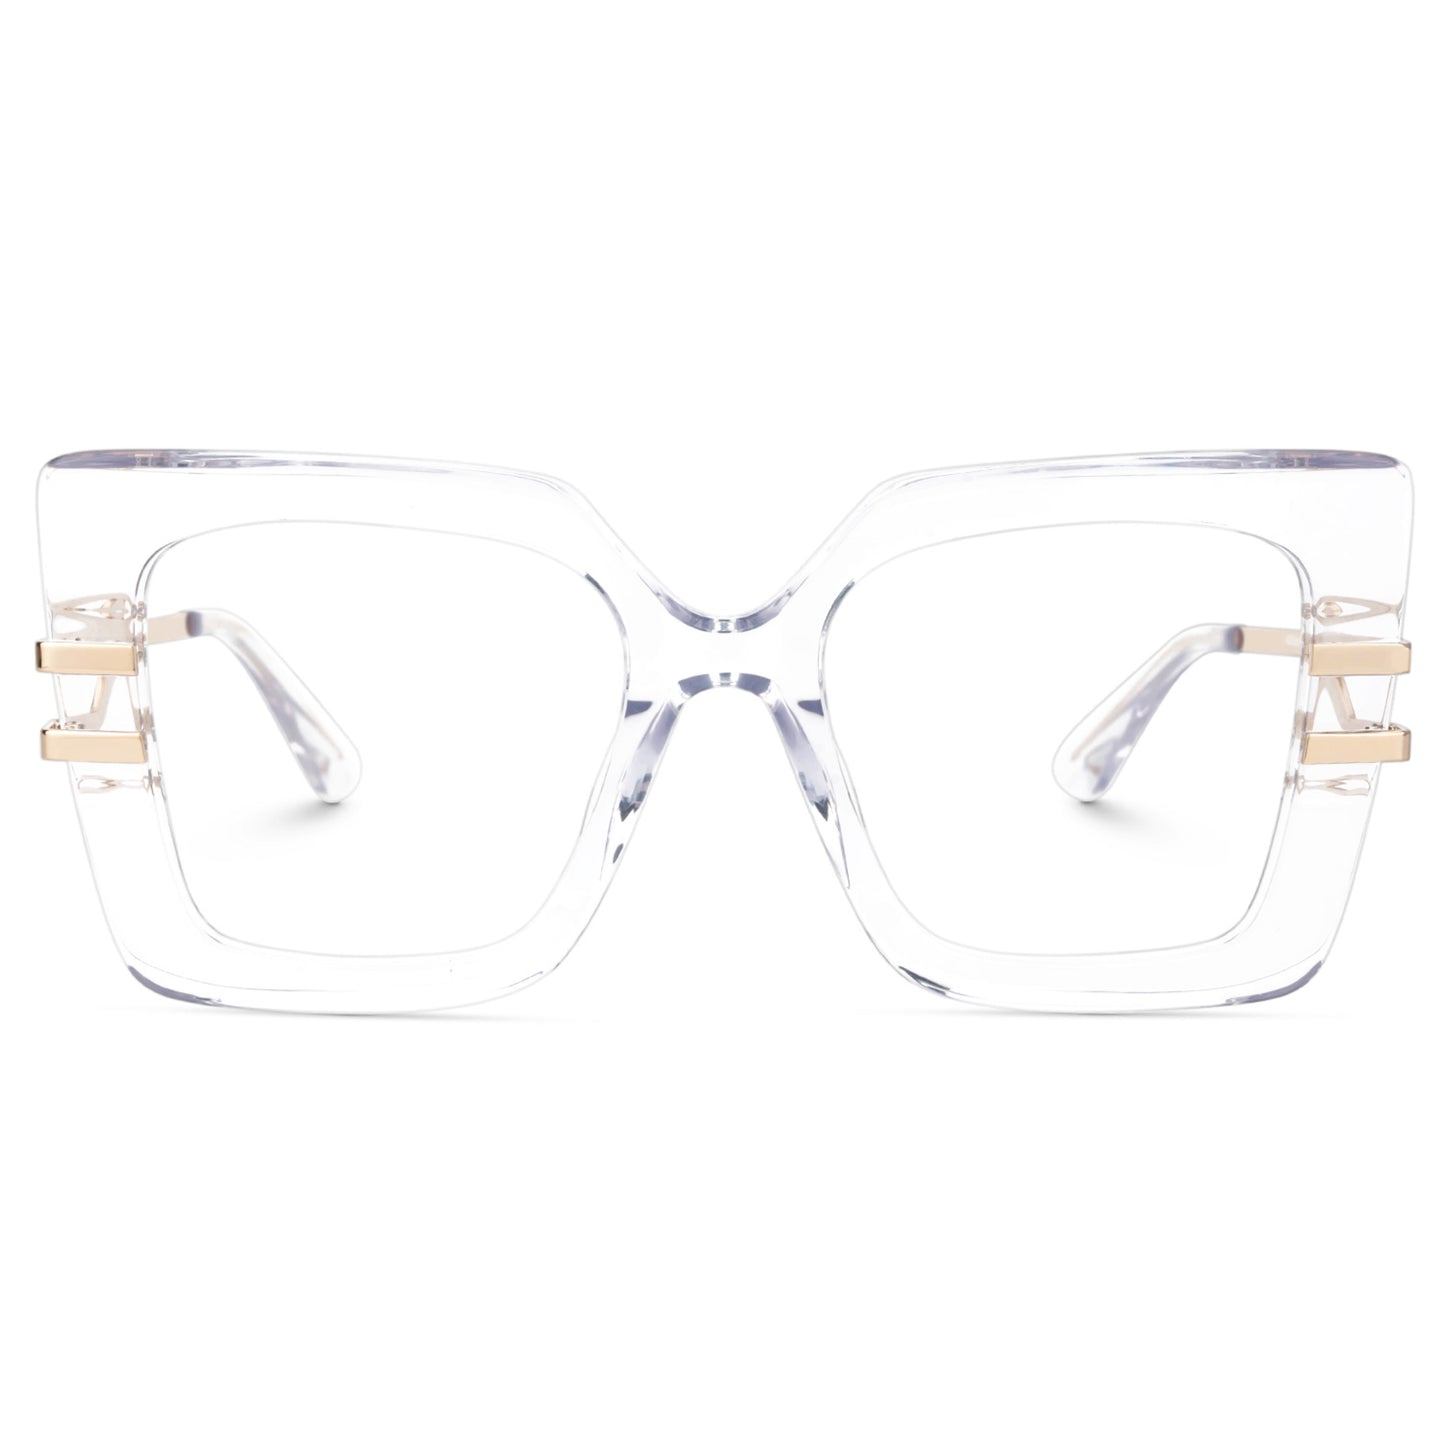 Marianna - Blue Light Glasses - Available in 4 colours